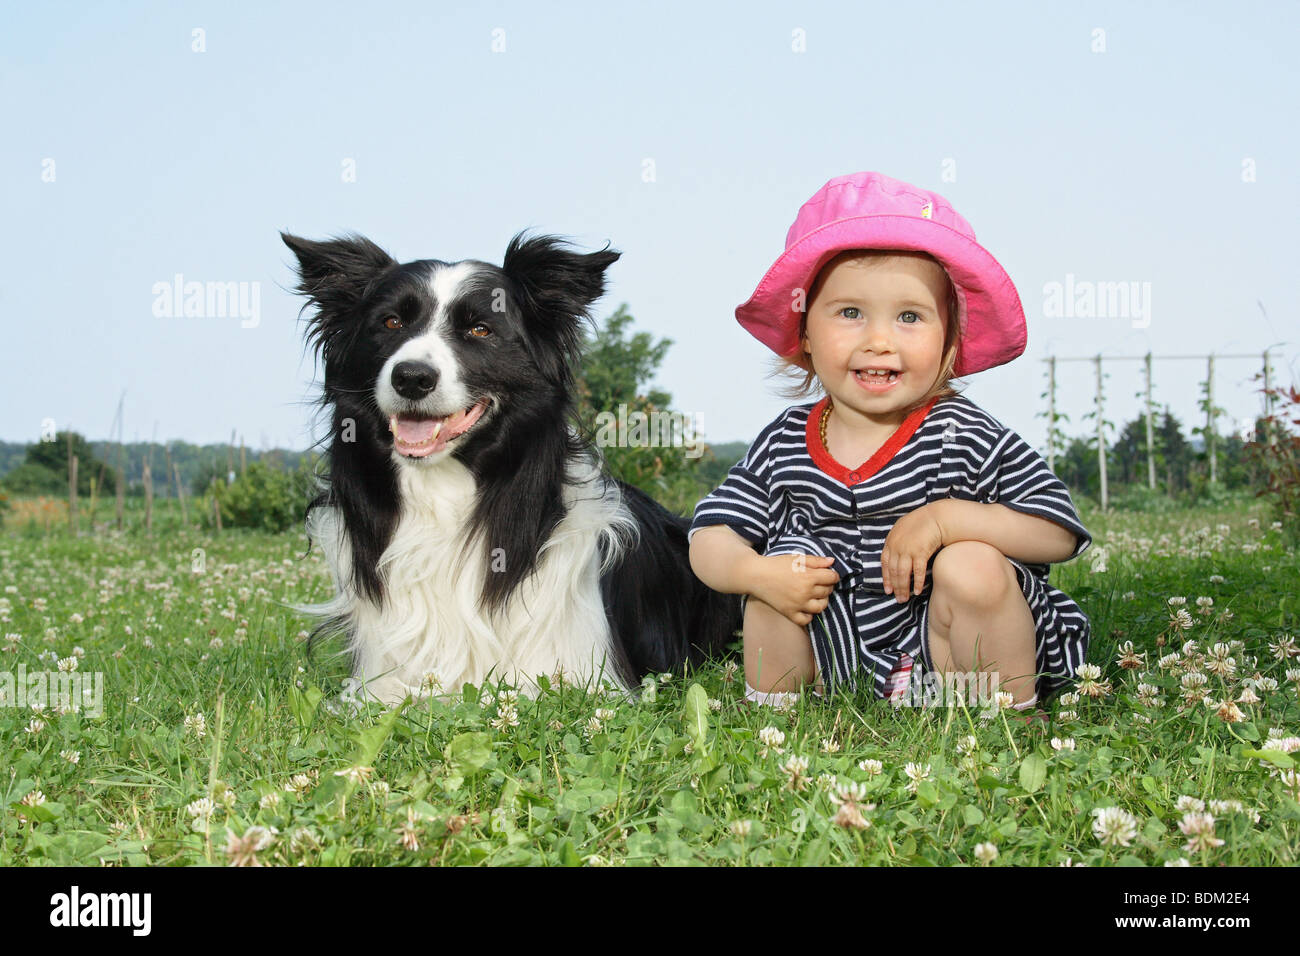 Border Collie dog - lying next to a little girl Stock Photo